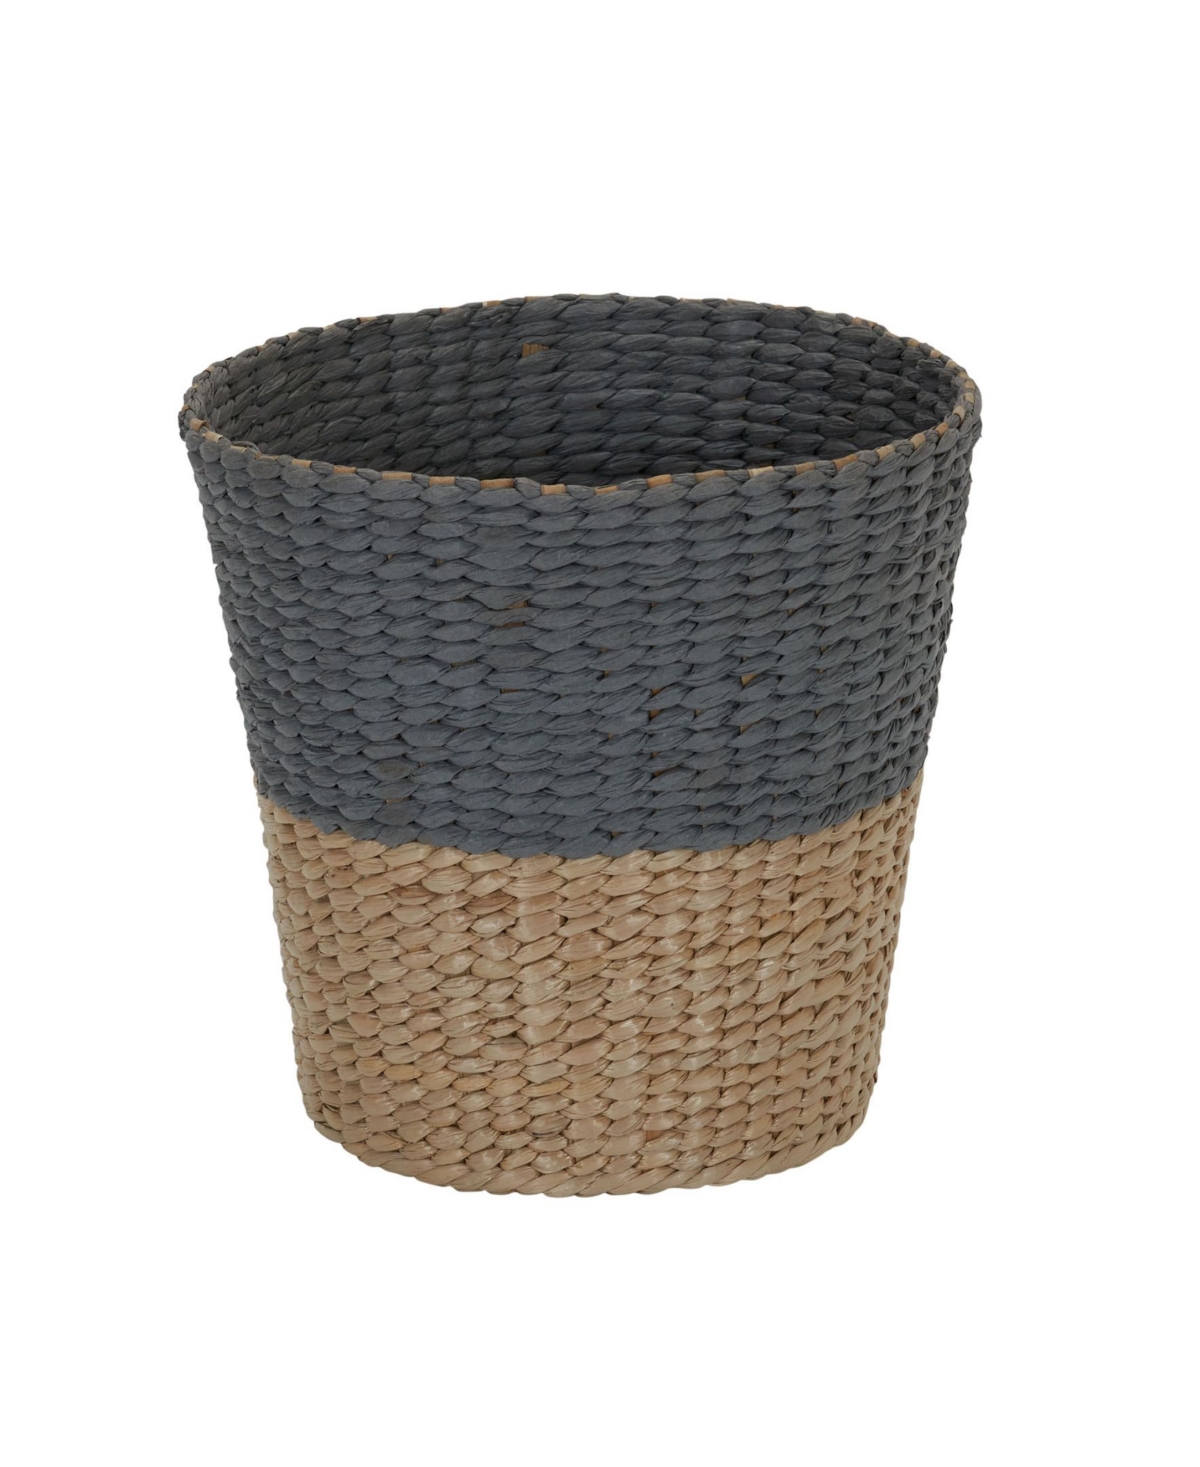 Cattail and Paper Waste Basket - Cream and Gray